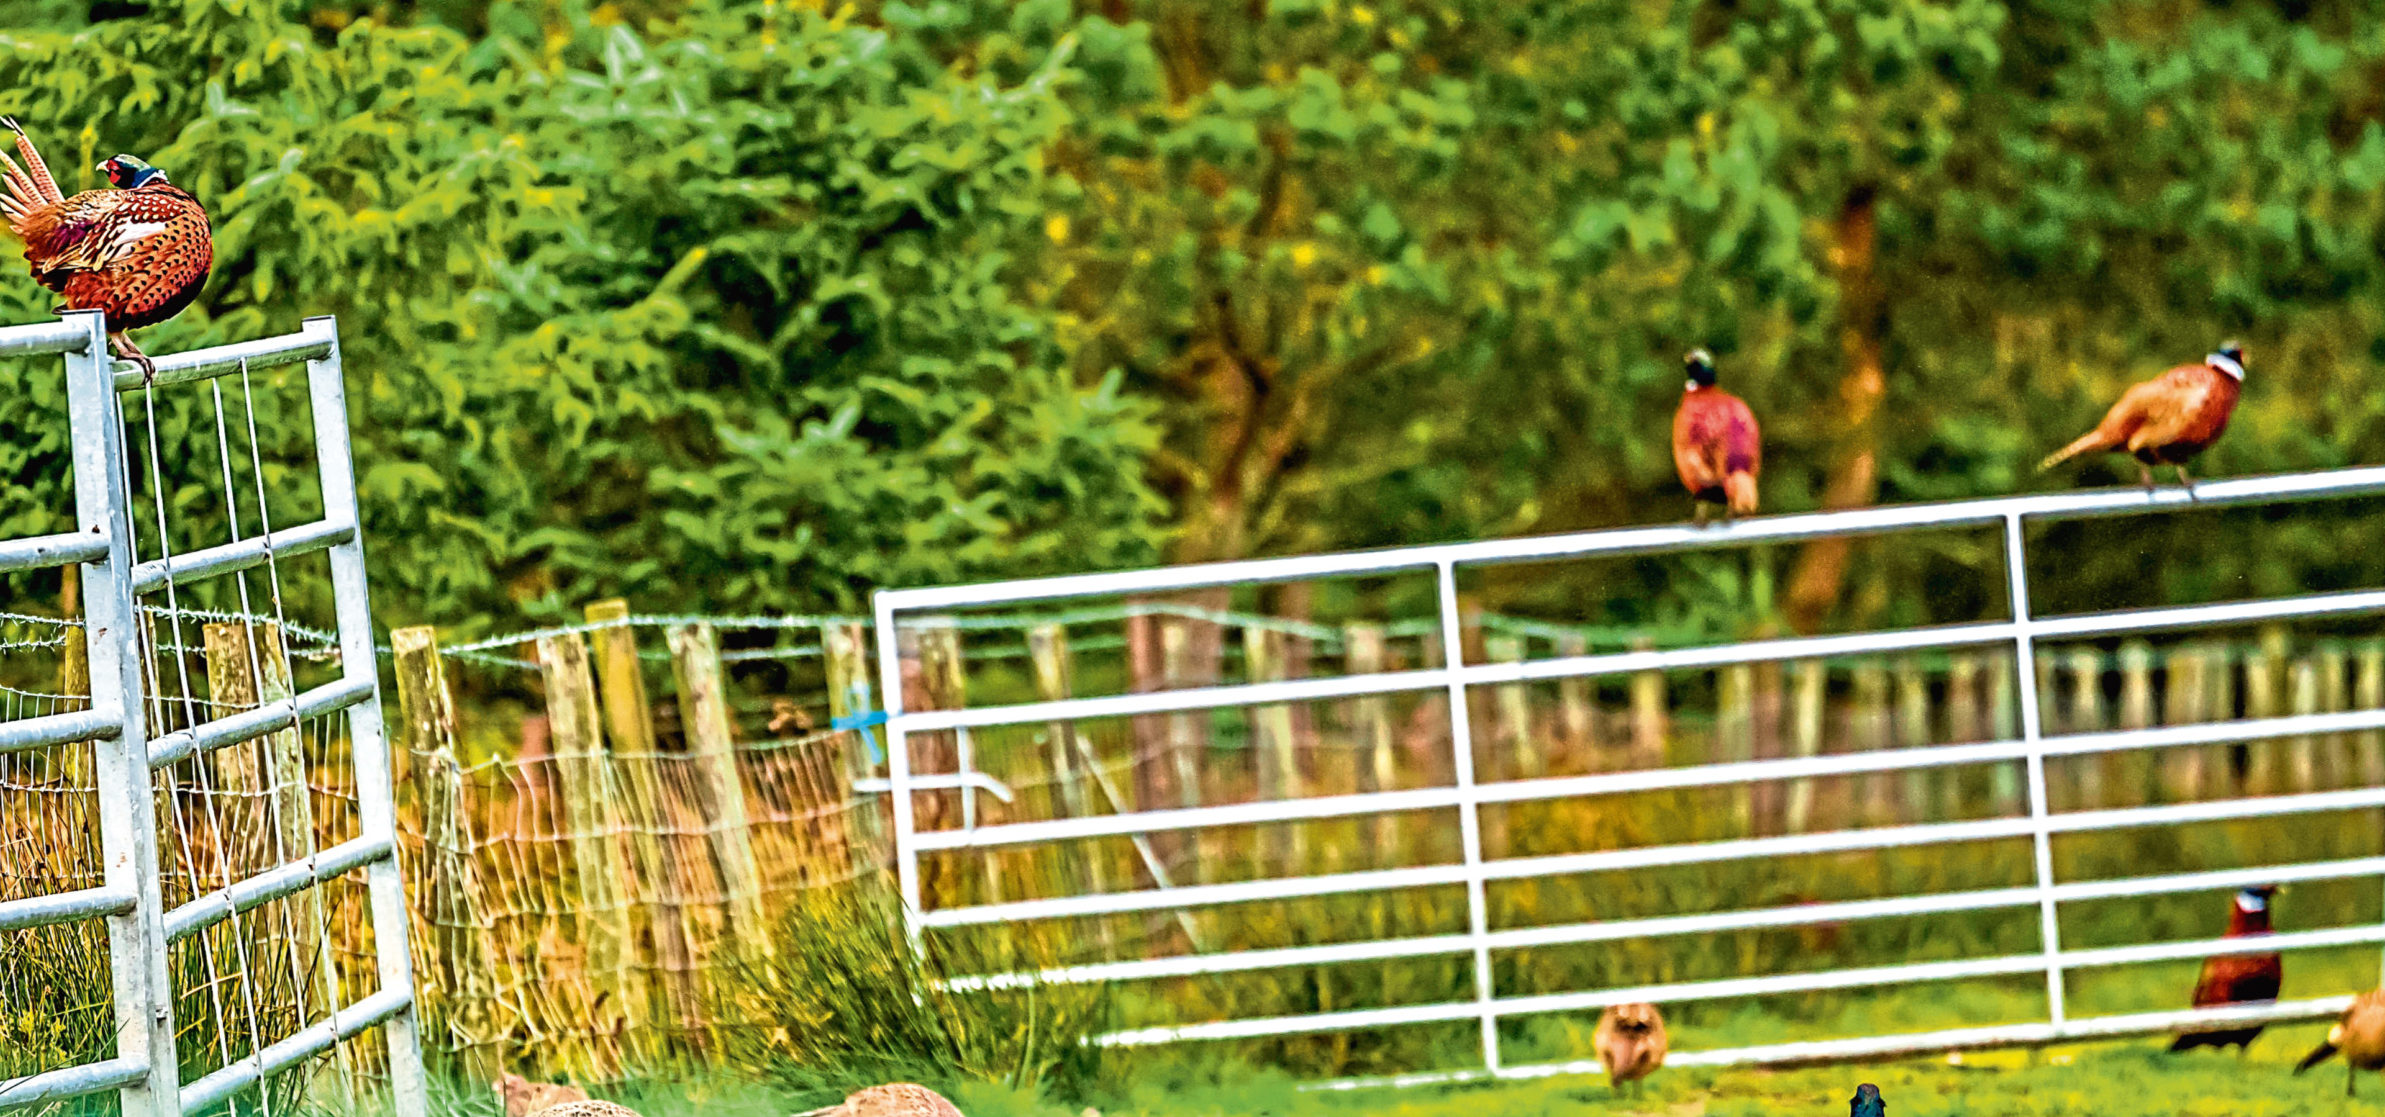 Large numbers of pheasants can be a nuisance if they encroach on to the let farm.